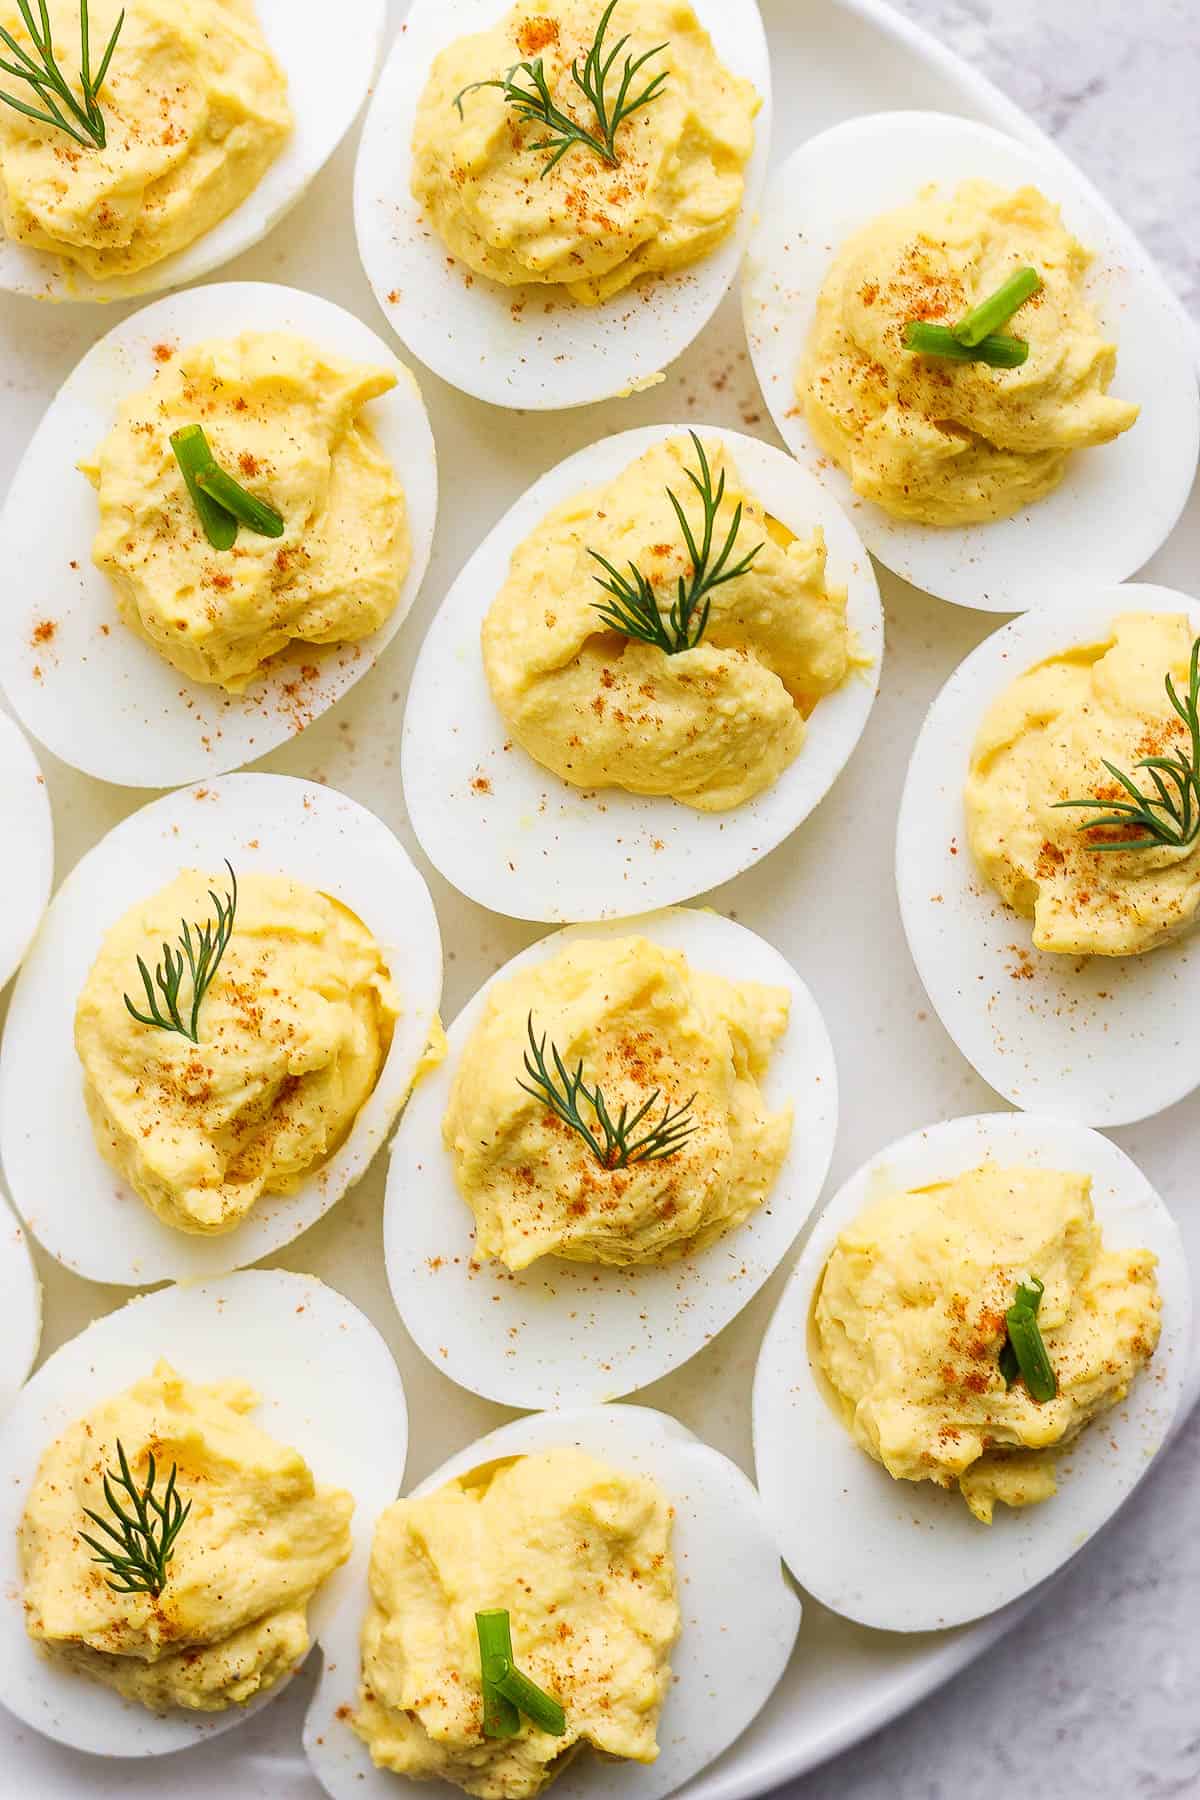 Deviled eggs on a plate topped with paprika, dill and chives.